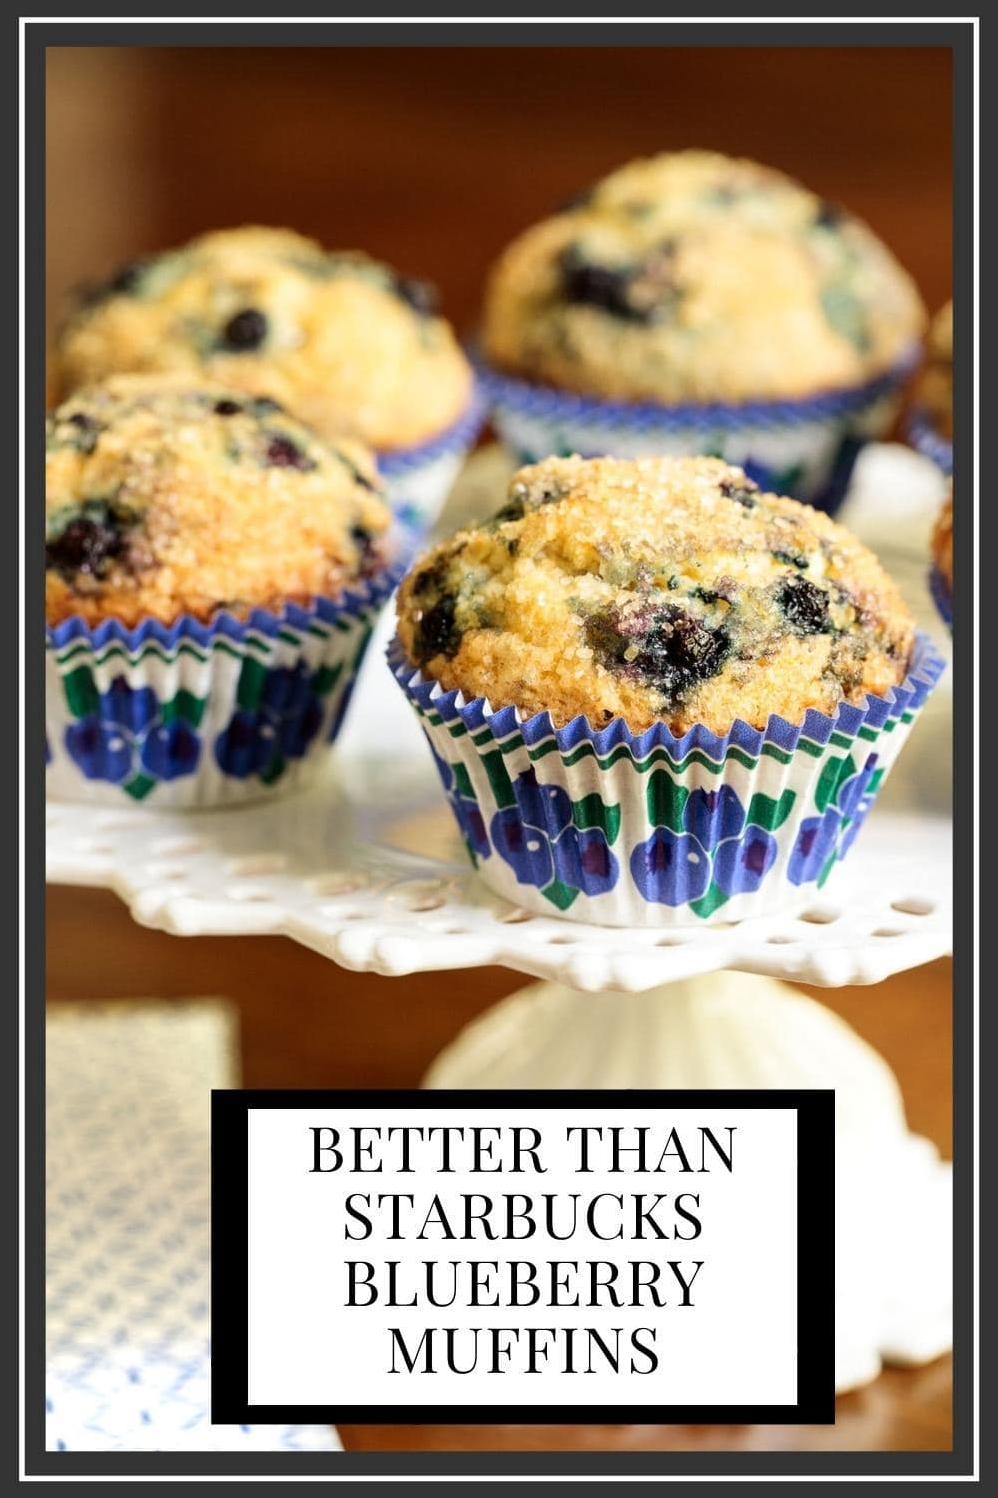  The tart sweetness of juicy blueberries pairs perfectly with the tender crumb of these muffins.